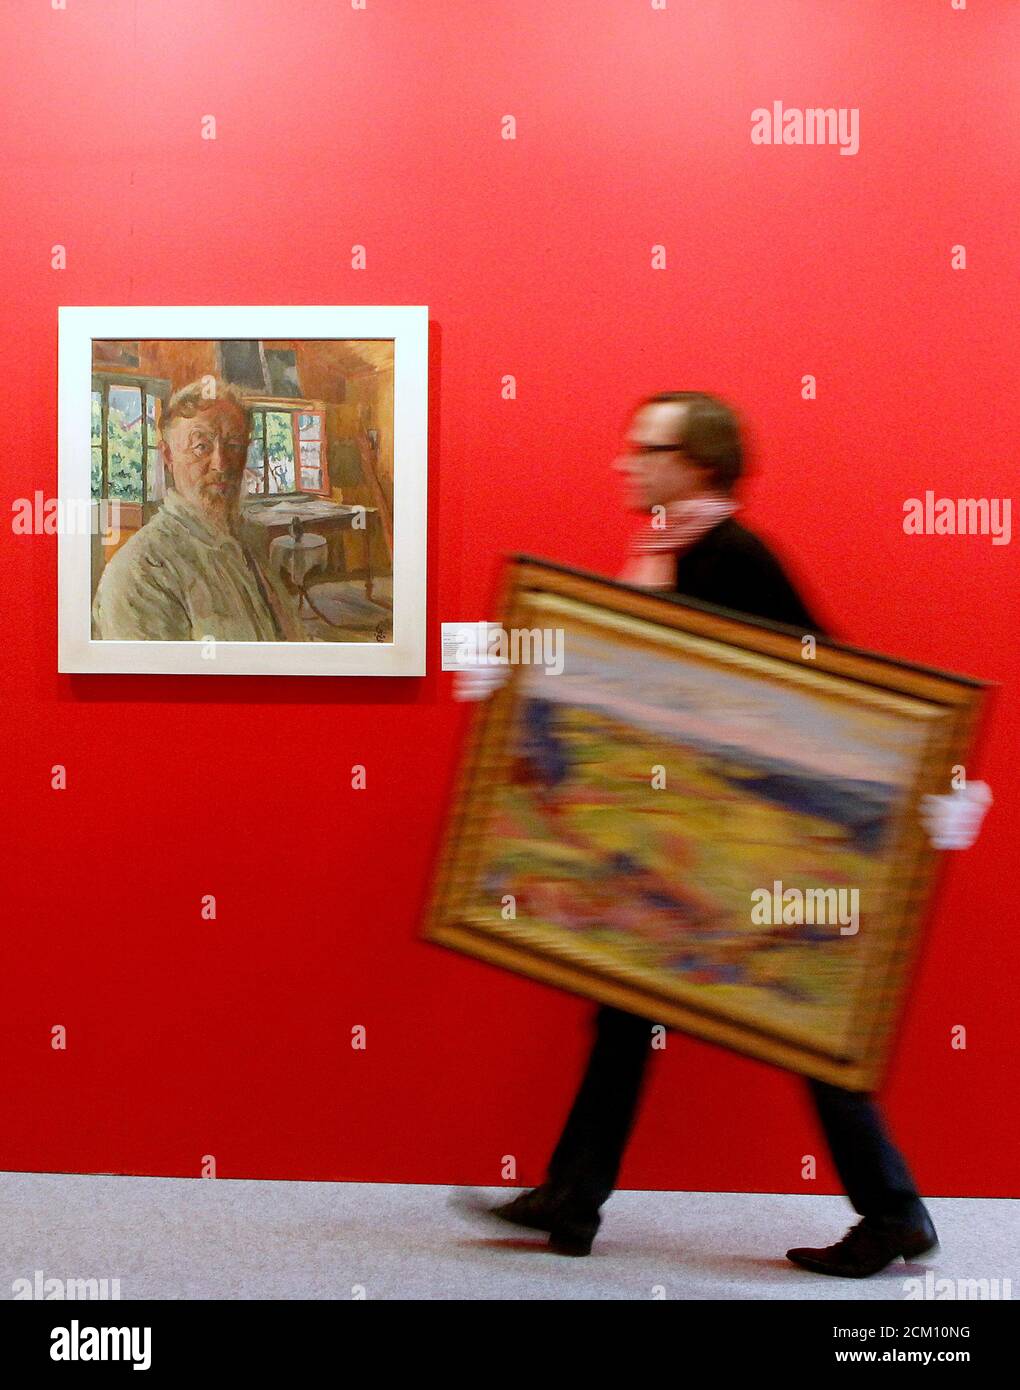 Hans-Peter Keller of Christie's Switzerland carries the painting 'Lueg'  from 1927 by late Swiss artist Cuno Amiet (1868-1961) during the  preparation of an exhibition before Christie's auctions in Zurich December  2, 2011.